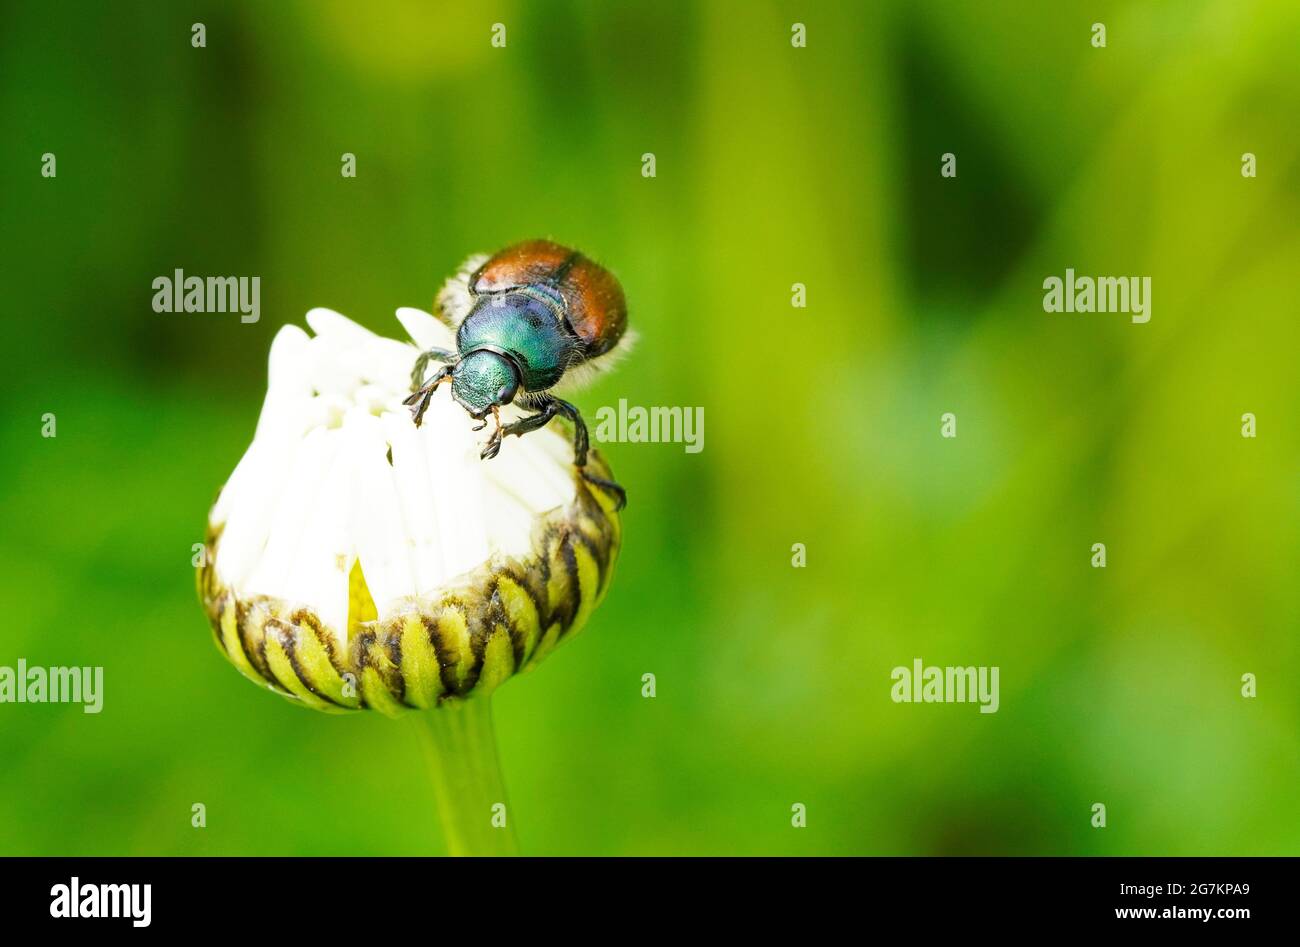 Garden chafer with a green-brown back. Phyllopertha horticola. Insect close up. Beetle of the scarab beetle family. Scarabaeidae Stock Photo